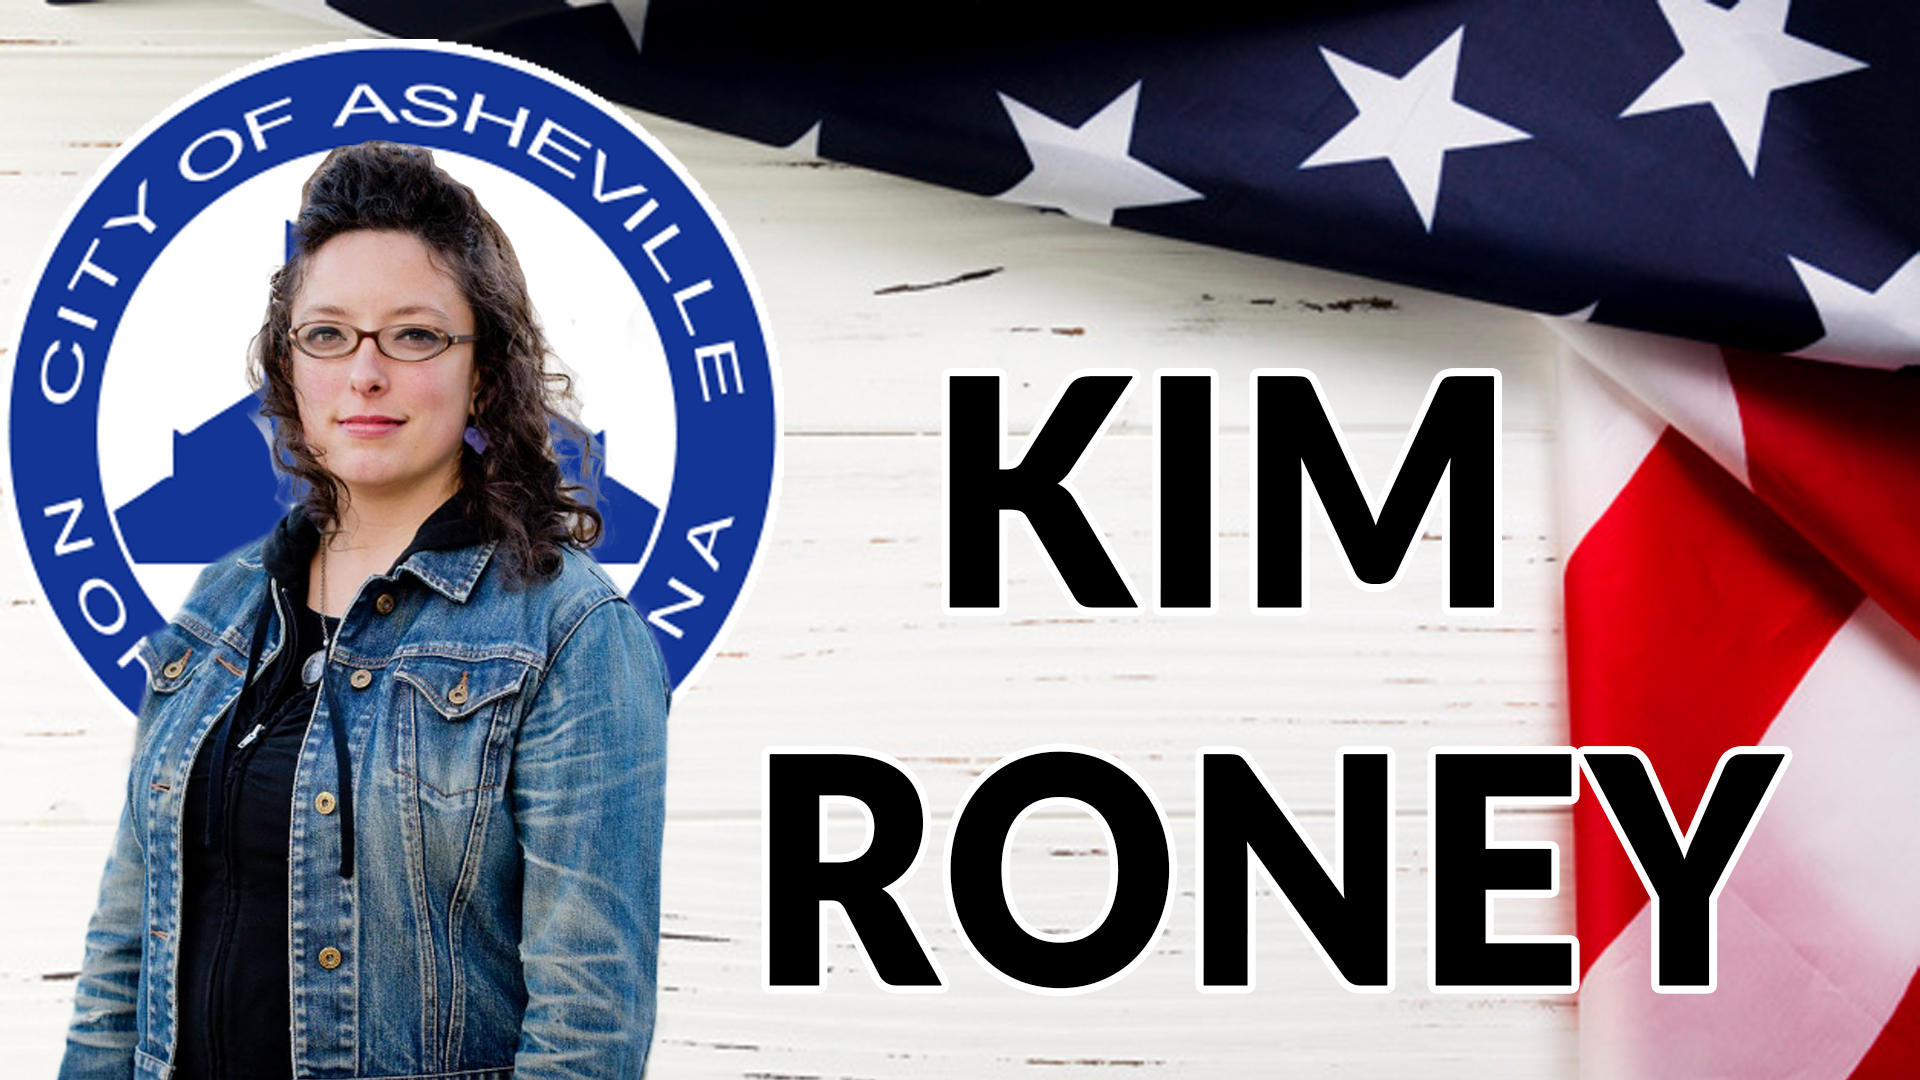 You are currently viewing Kim Roney, Asheville City Council Candidate